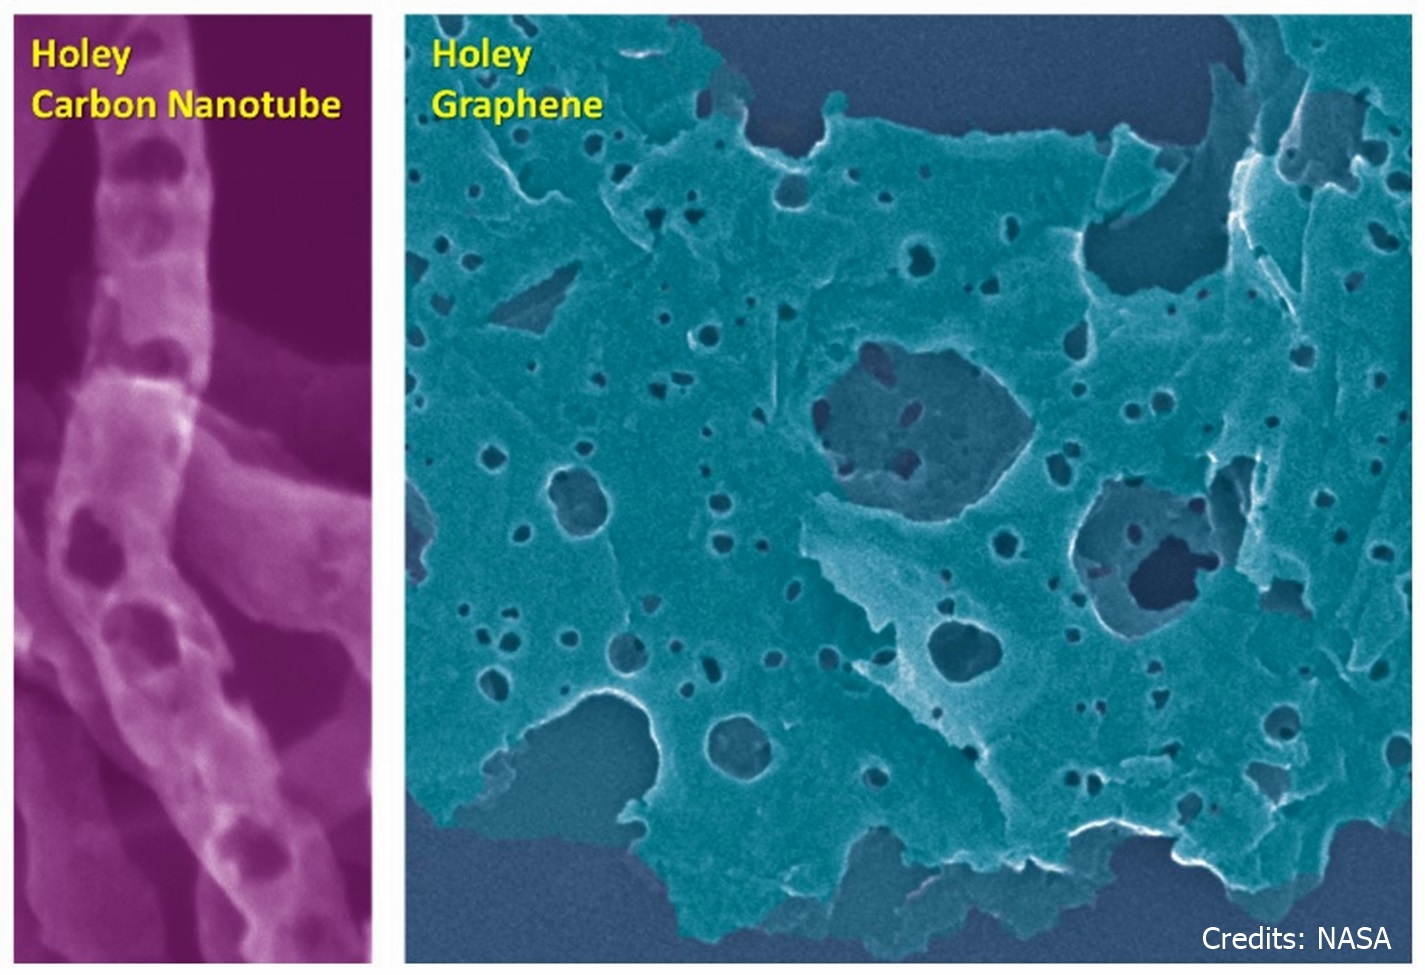 Electron Microscopy Images of Holey Carbon Nanotubes and Holey Graphene